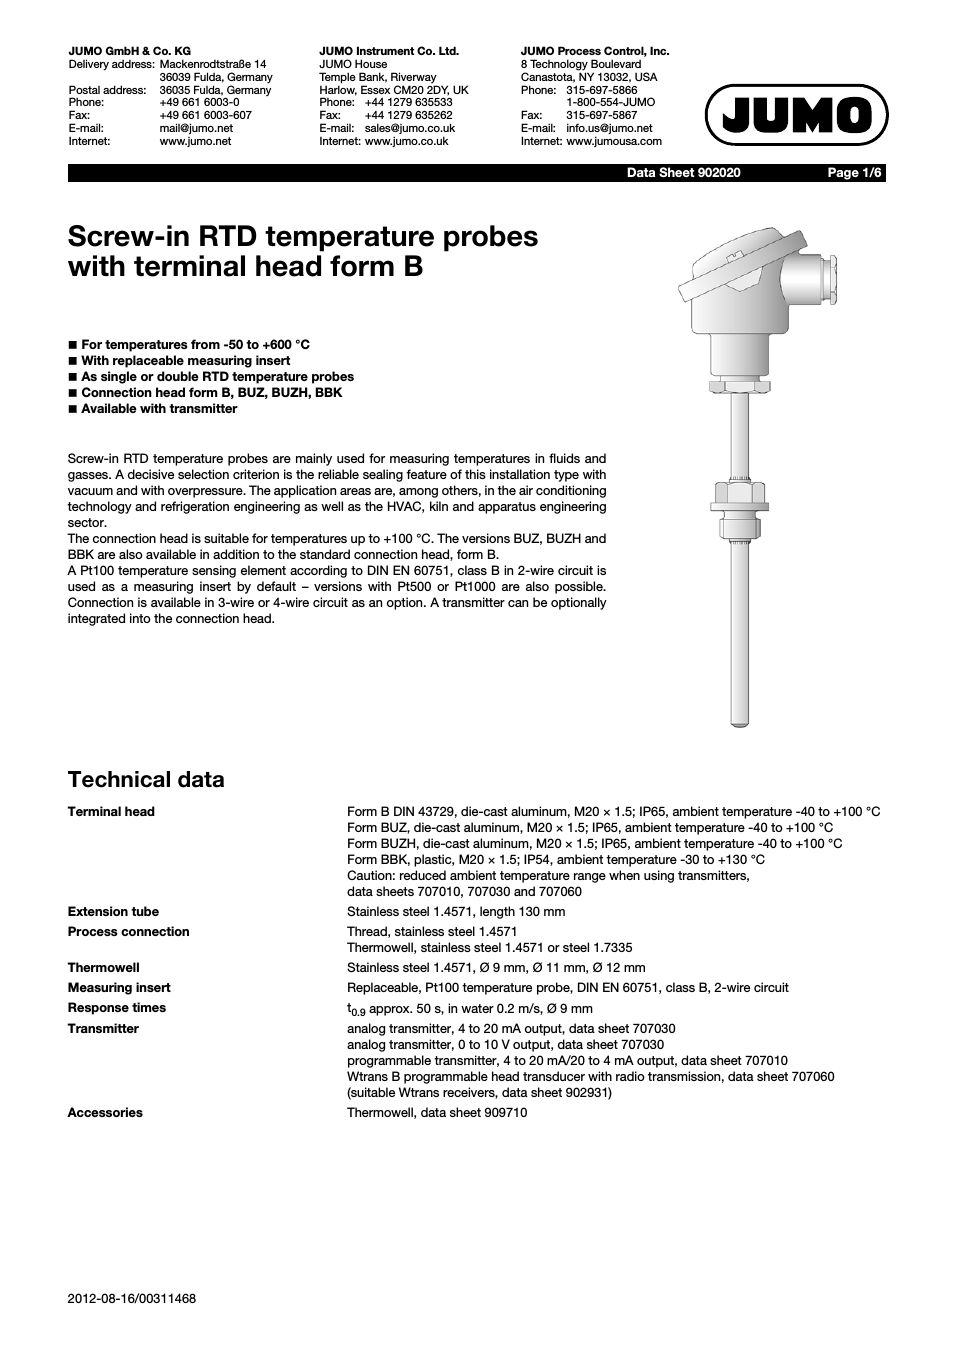 902020 Screw-in RTD Temperature Probe with Form B Terminal Head Data Sheet